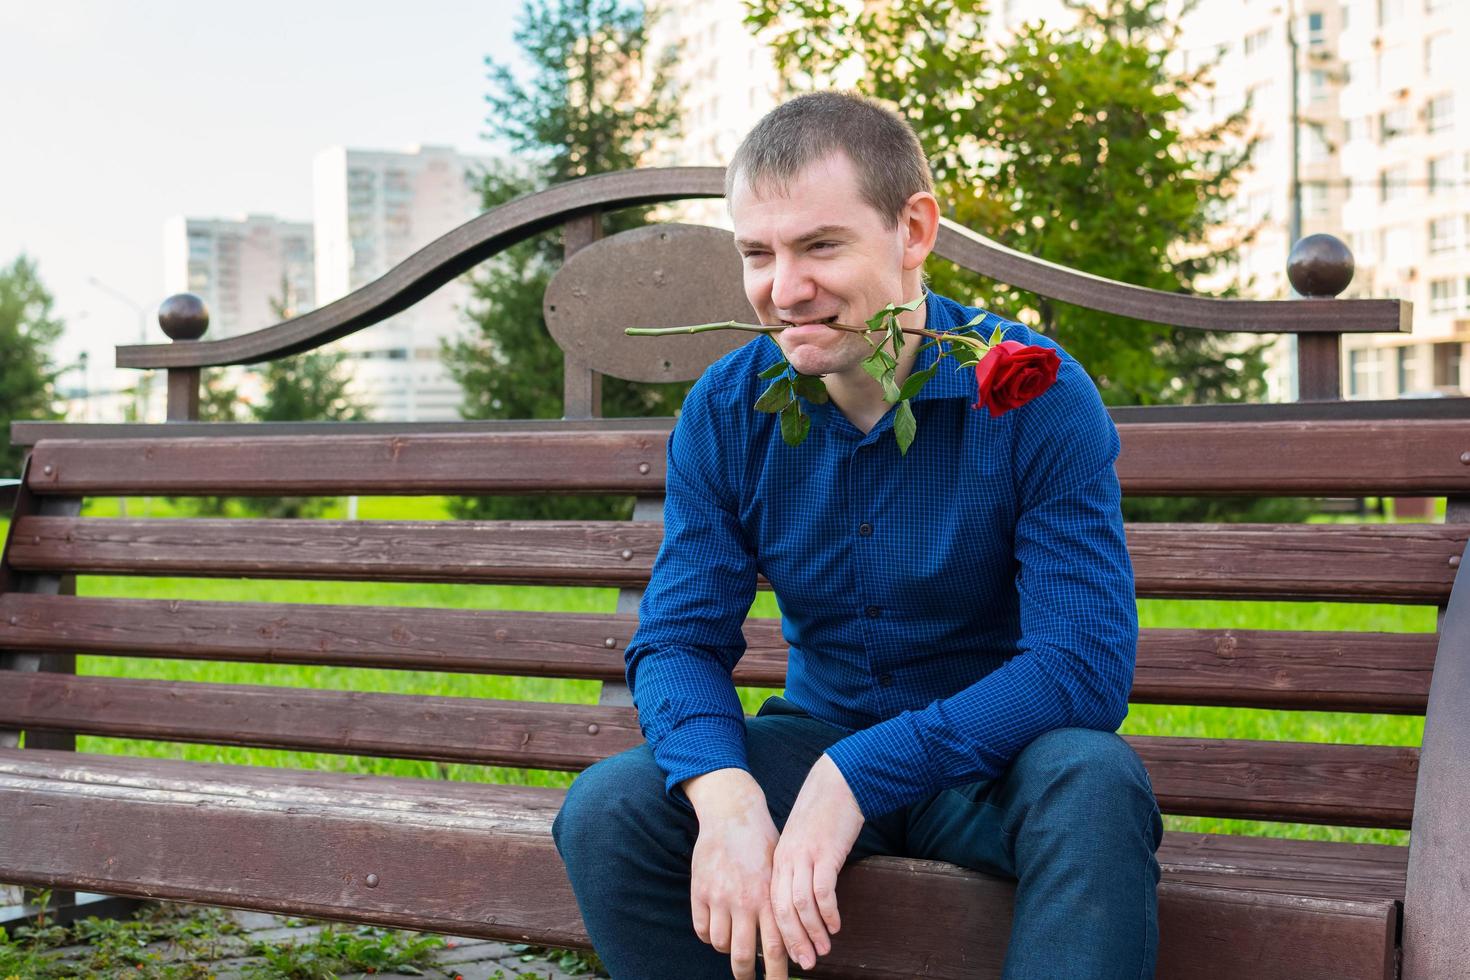 A man with a rose in his teeth sits on a park bench and looks at women photo